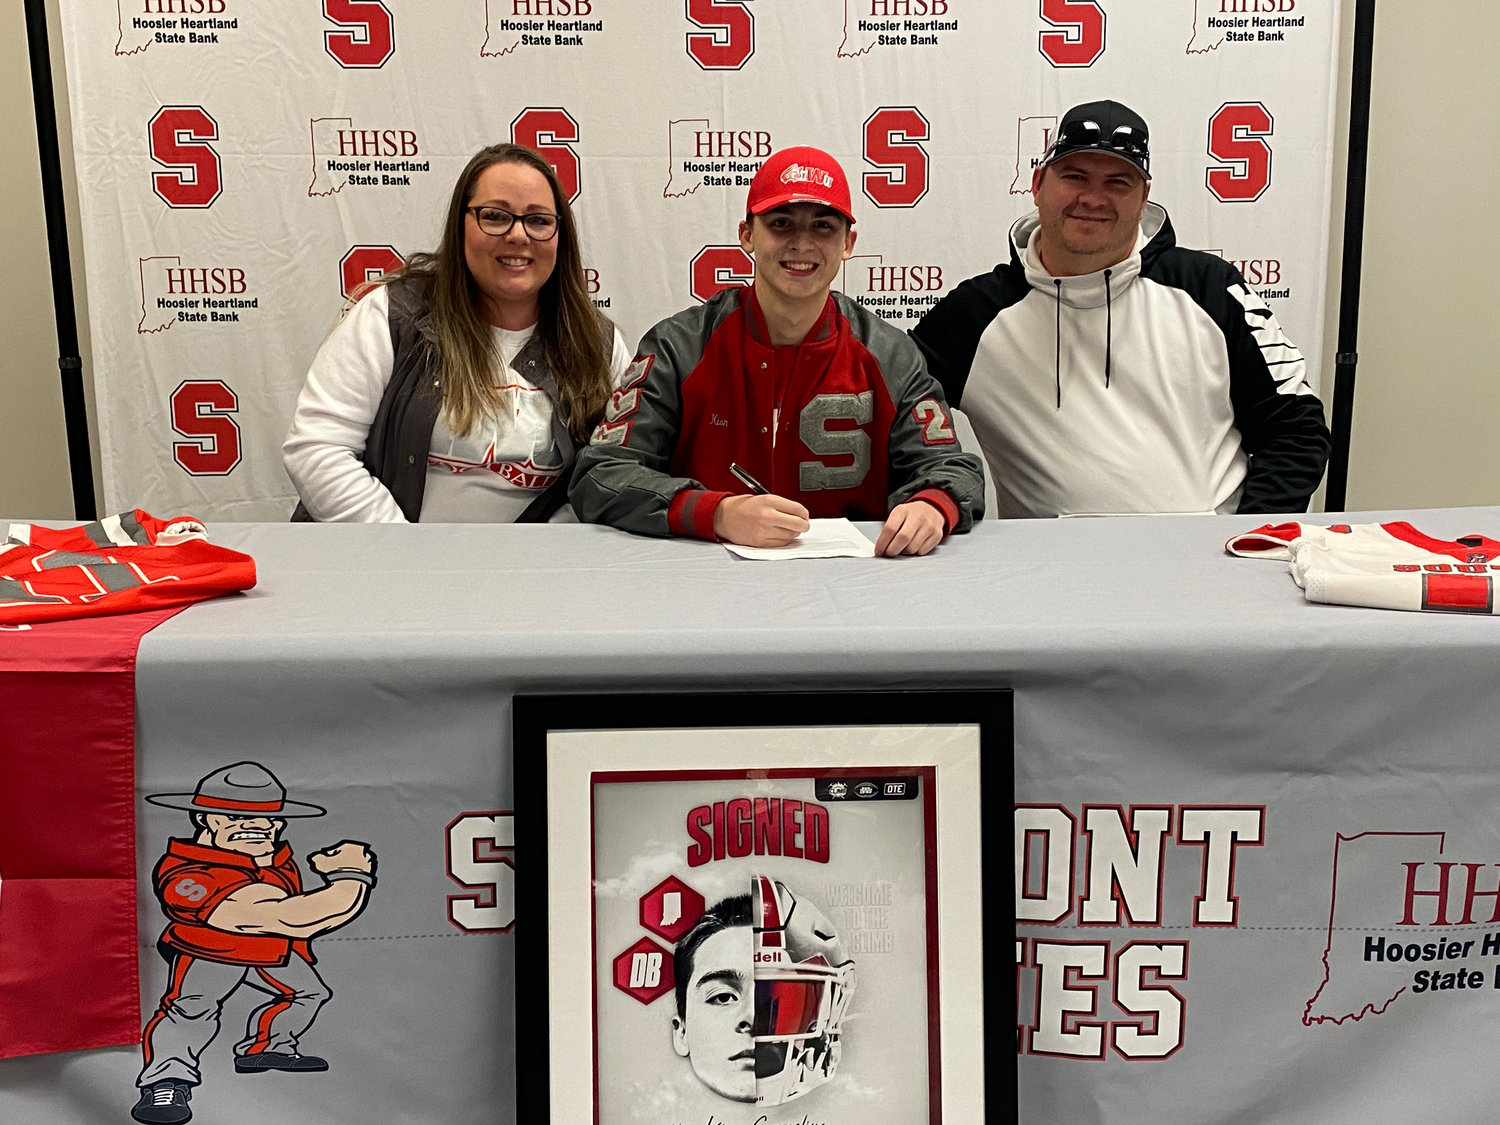 Kion Cornelius alongside both his parents made his official college choice on Friday when he signed to continue his football academic and football career at Indiana Wesleyan University.